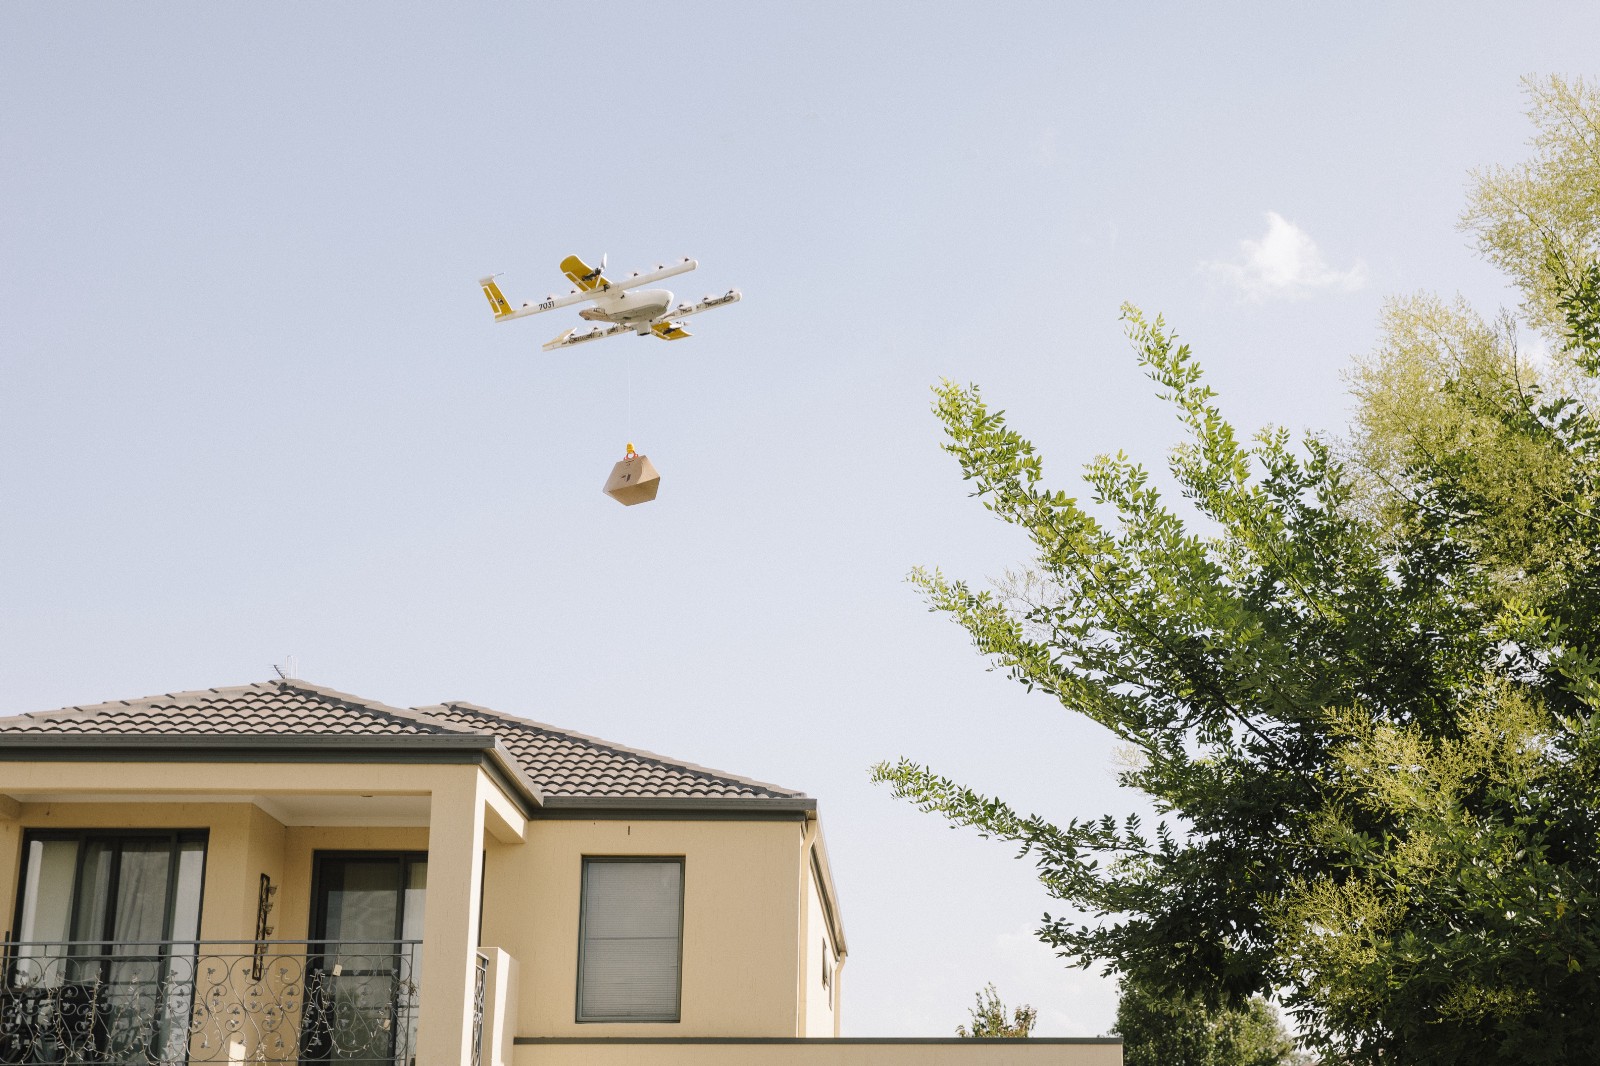 Wing Officially Australian Drone Delivery Service - Spectrum